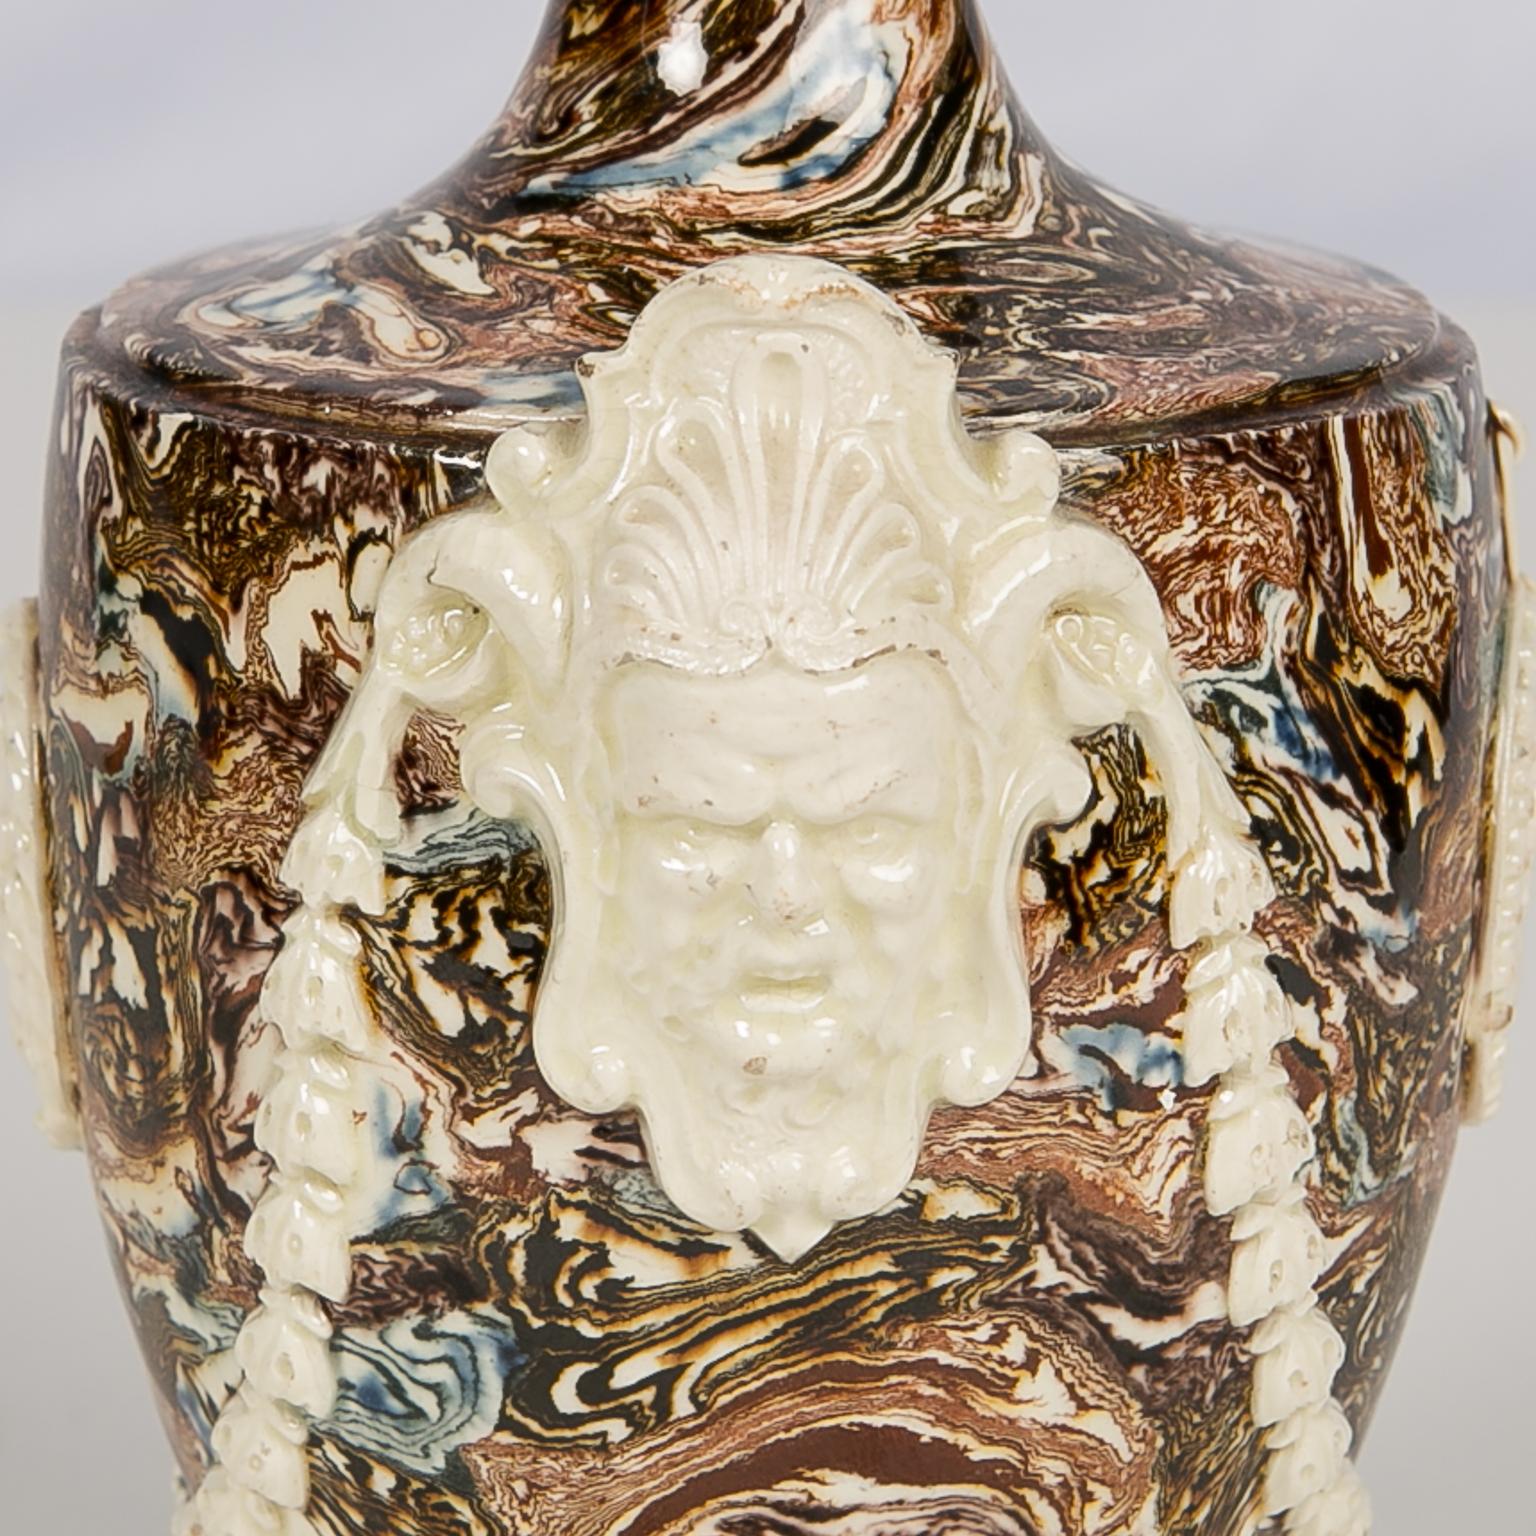 Solid Agateware Vase 18th Century Made by Neale & Co. 1